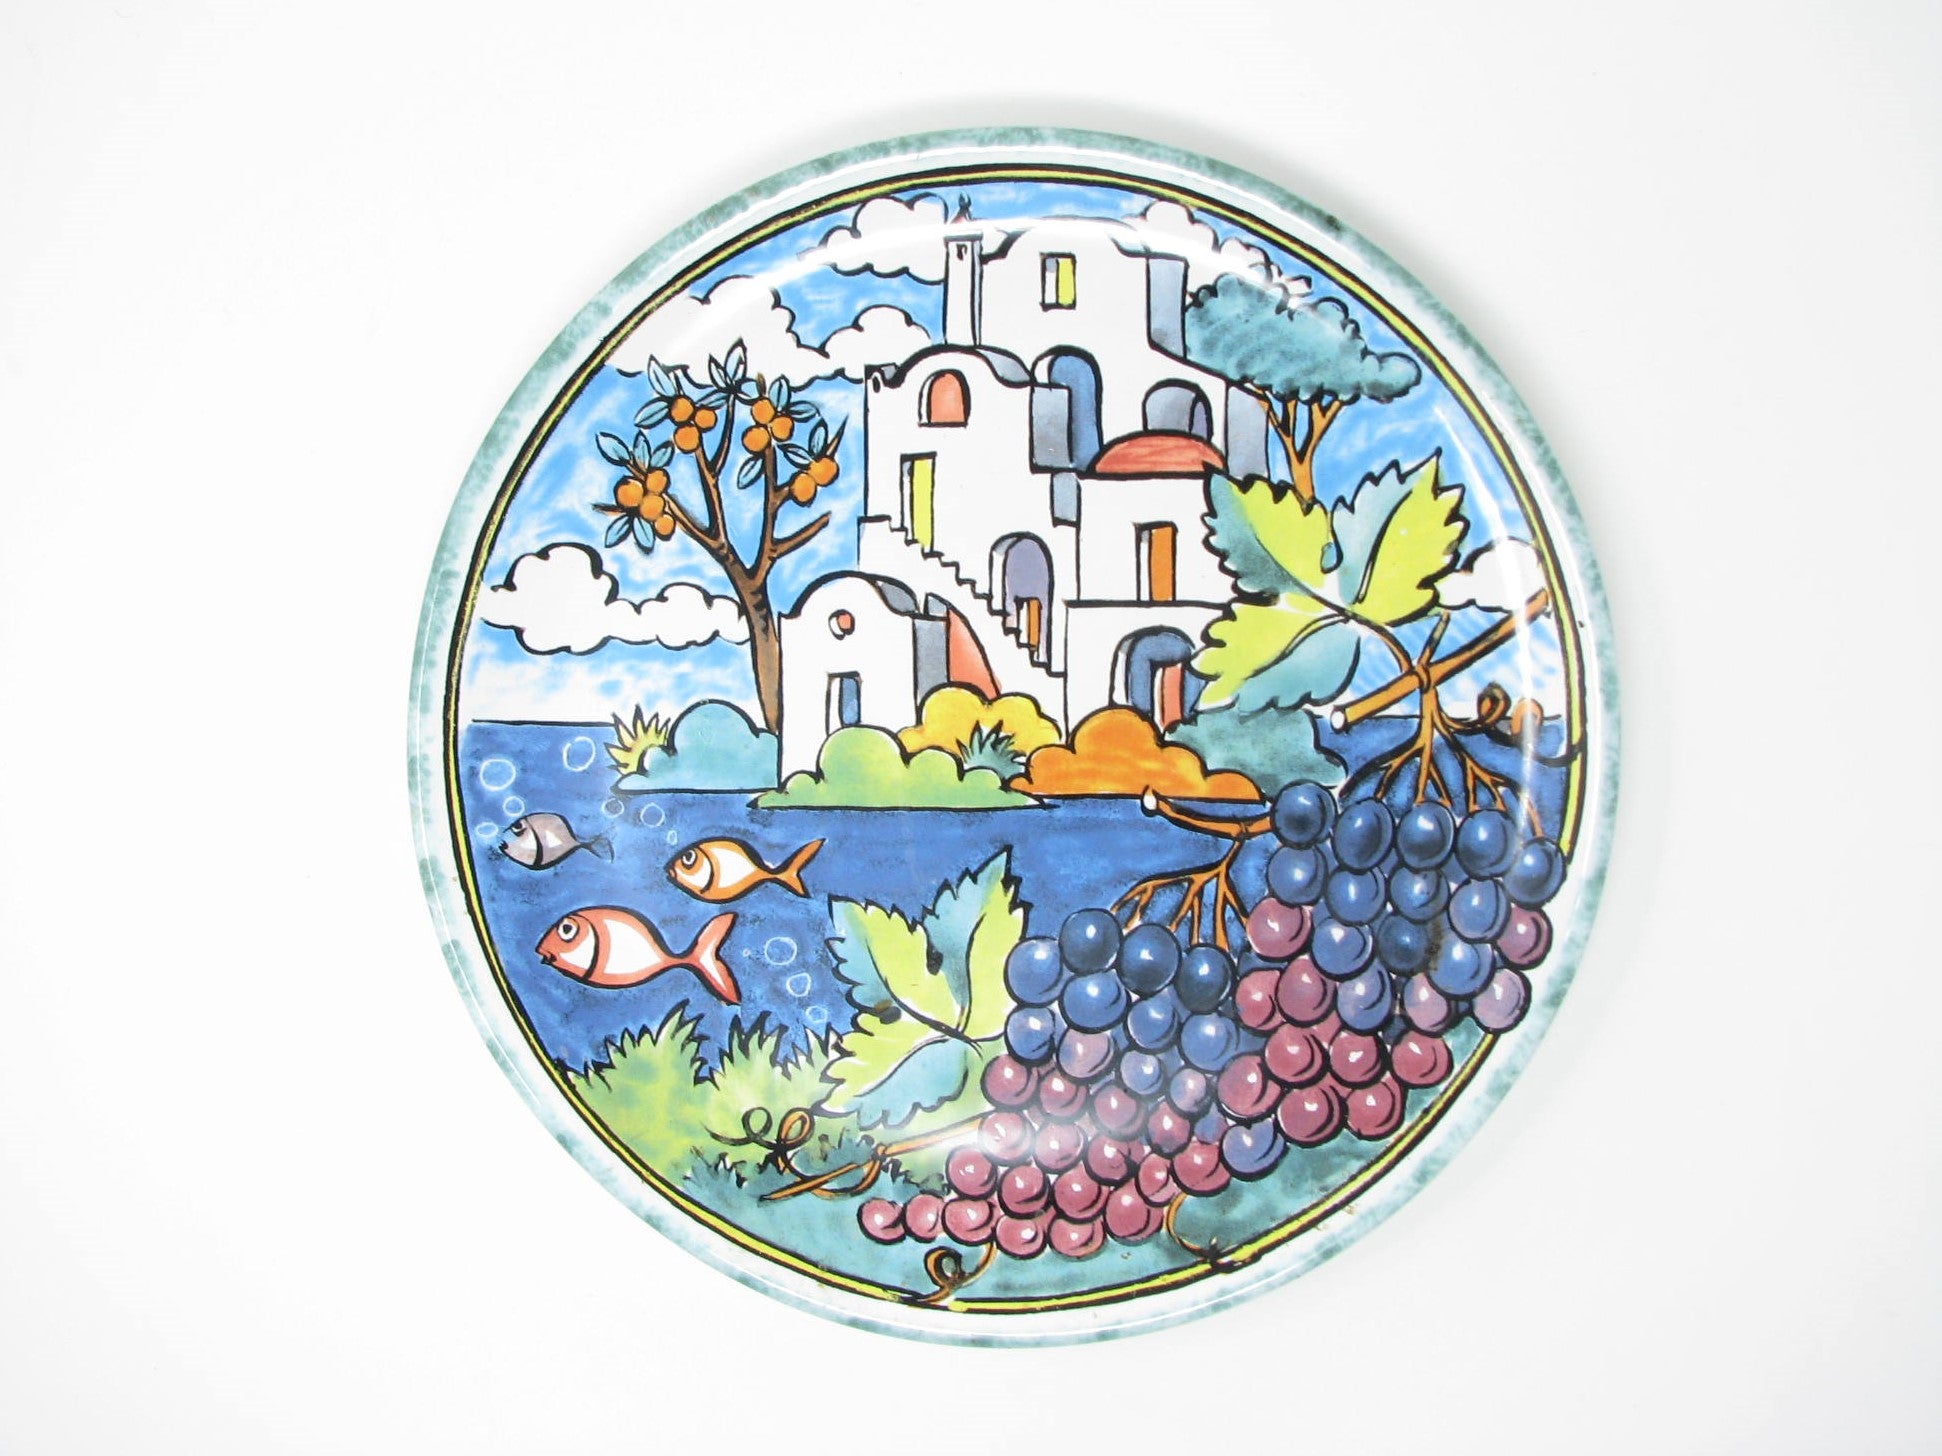 edgebrookhouse - Vintage Pisapia Design & Creations Italy Hand-Painted Pottery Decorative Plate Featuring Ravello